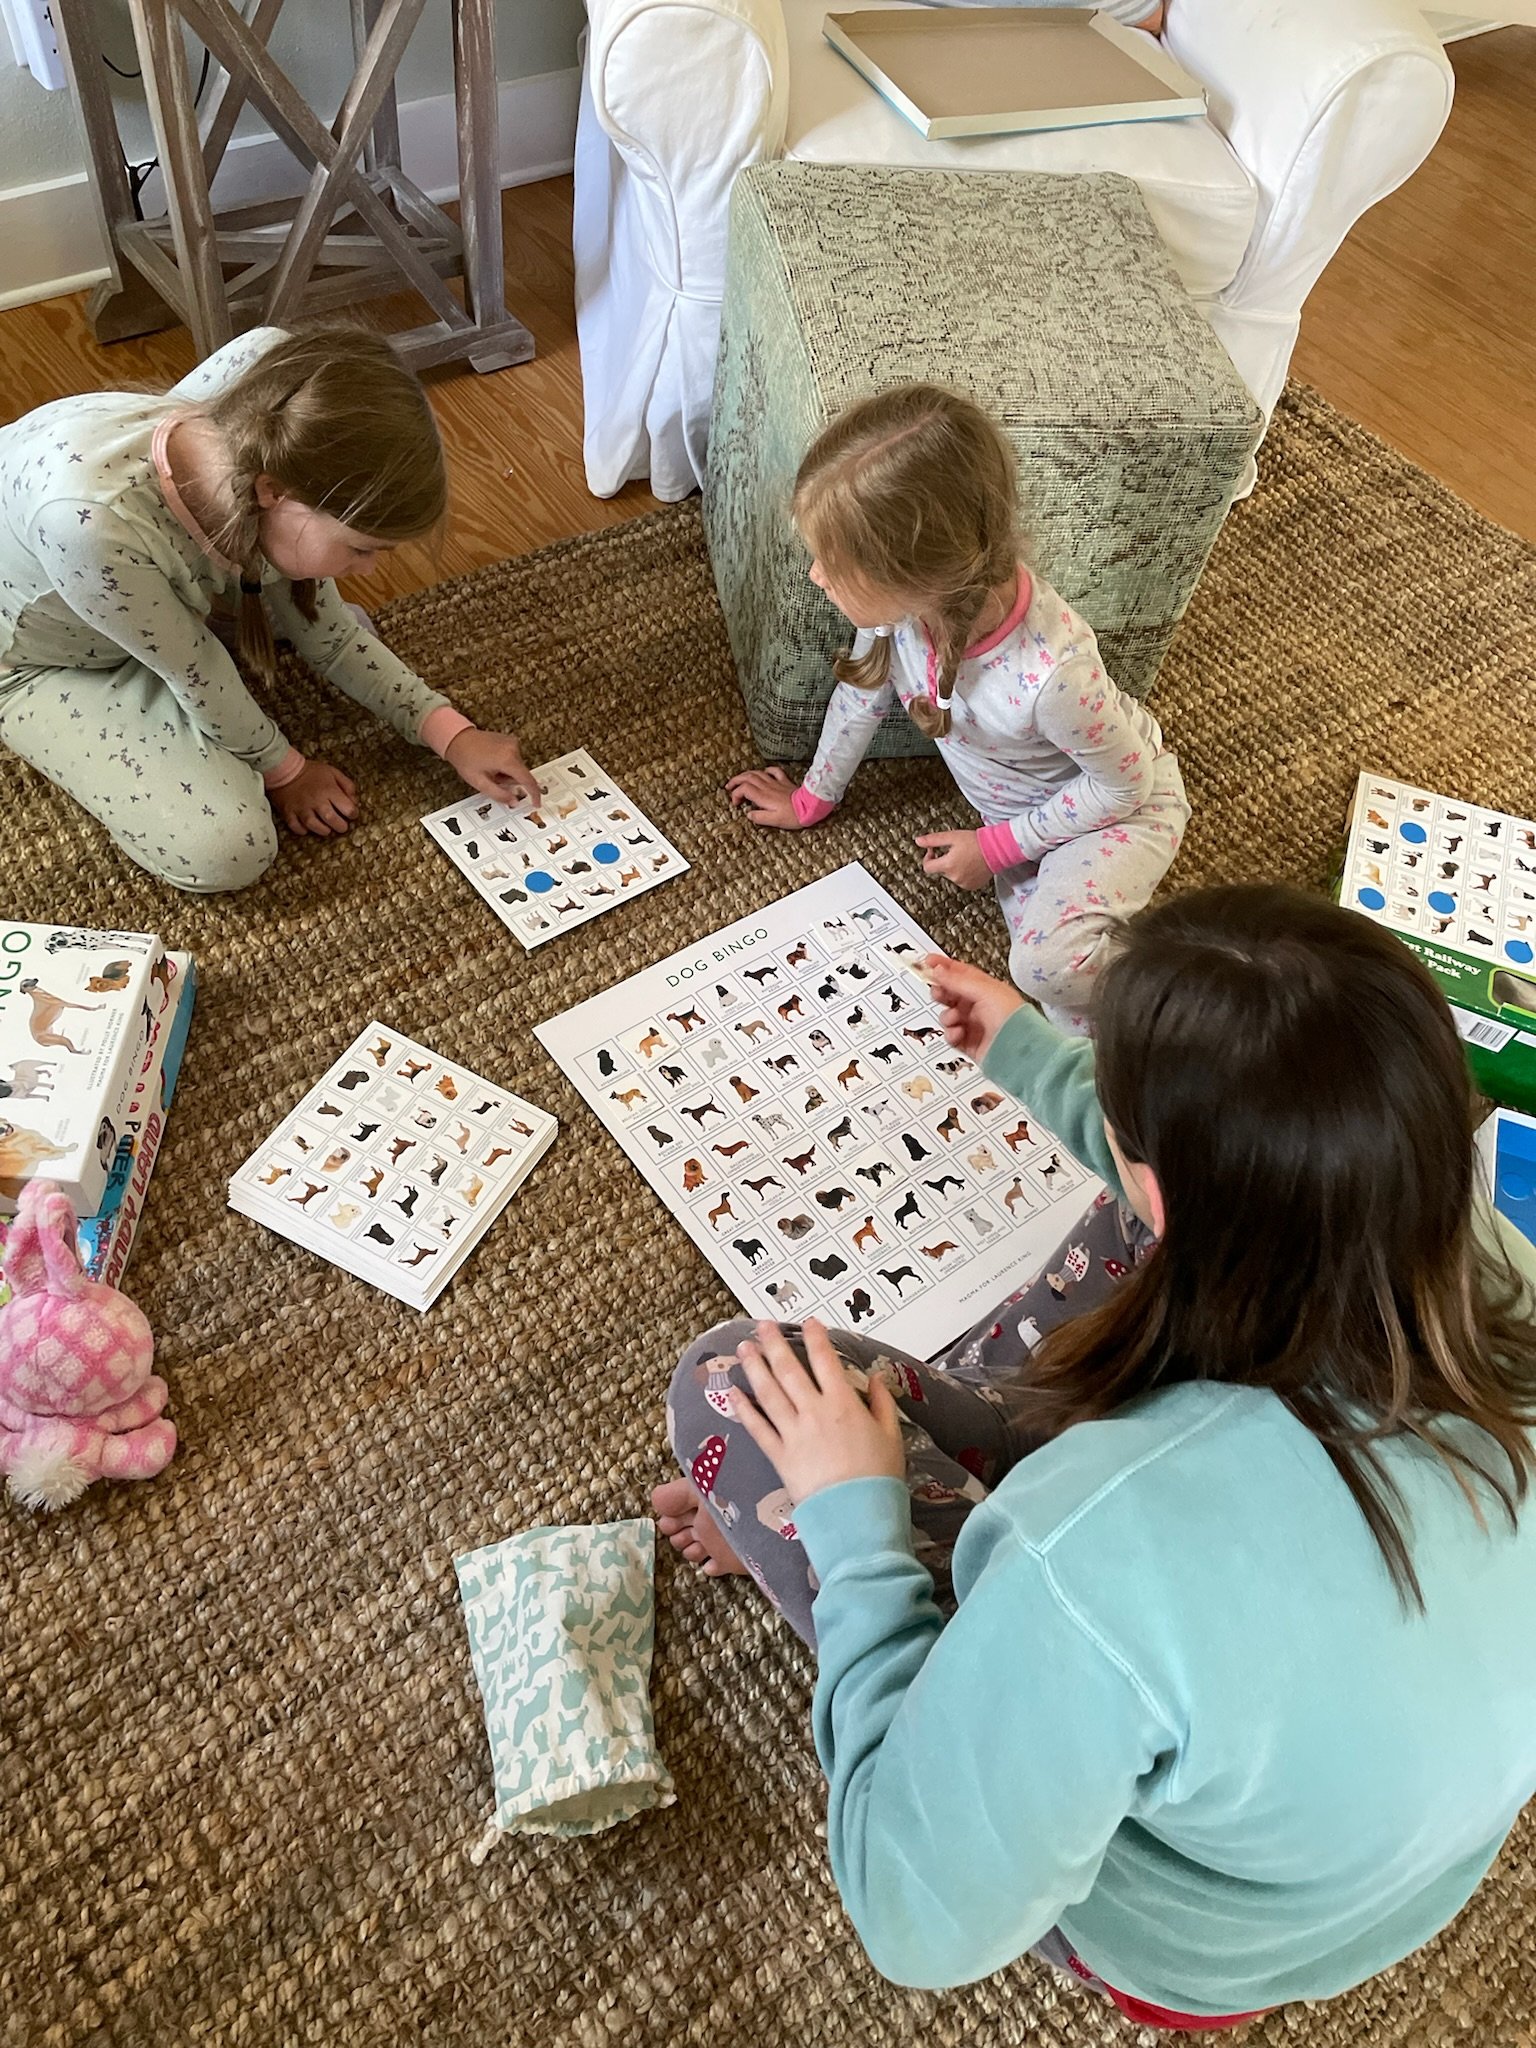 children playing a game together with teenage sister